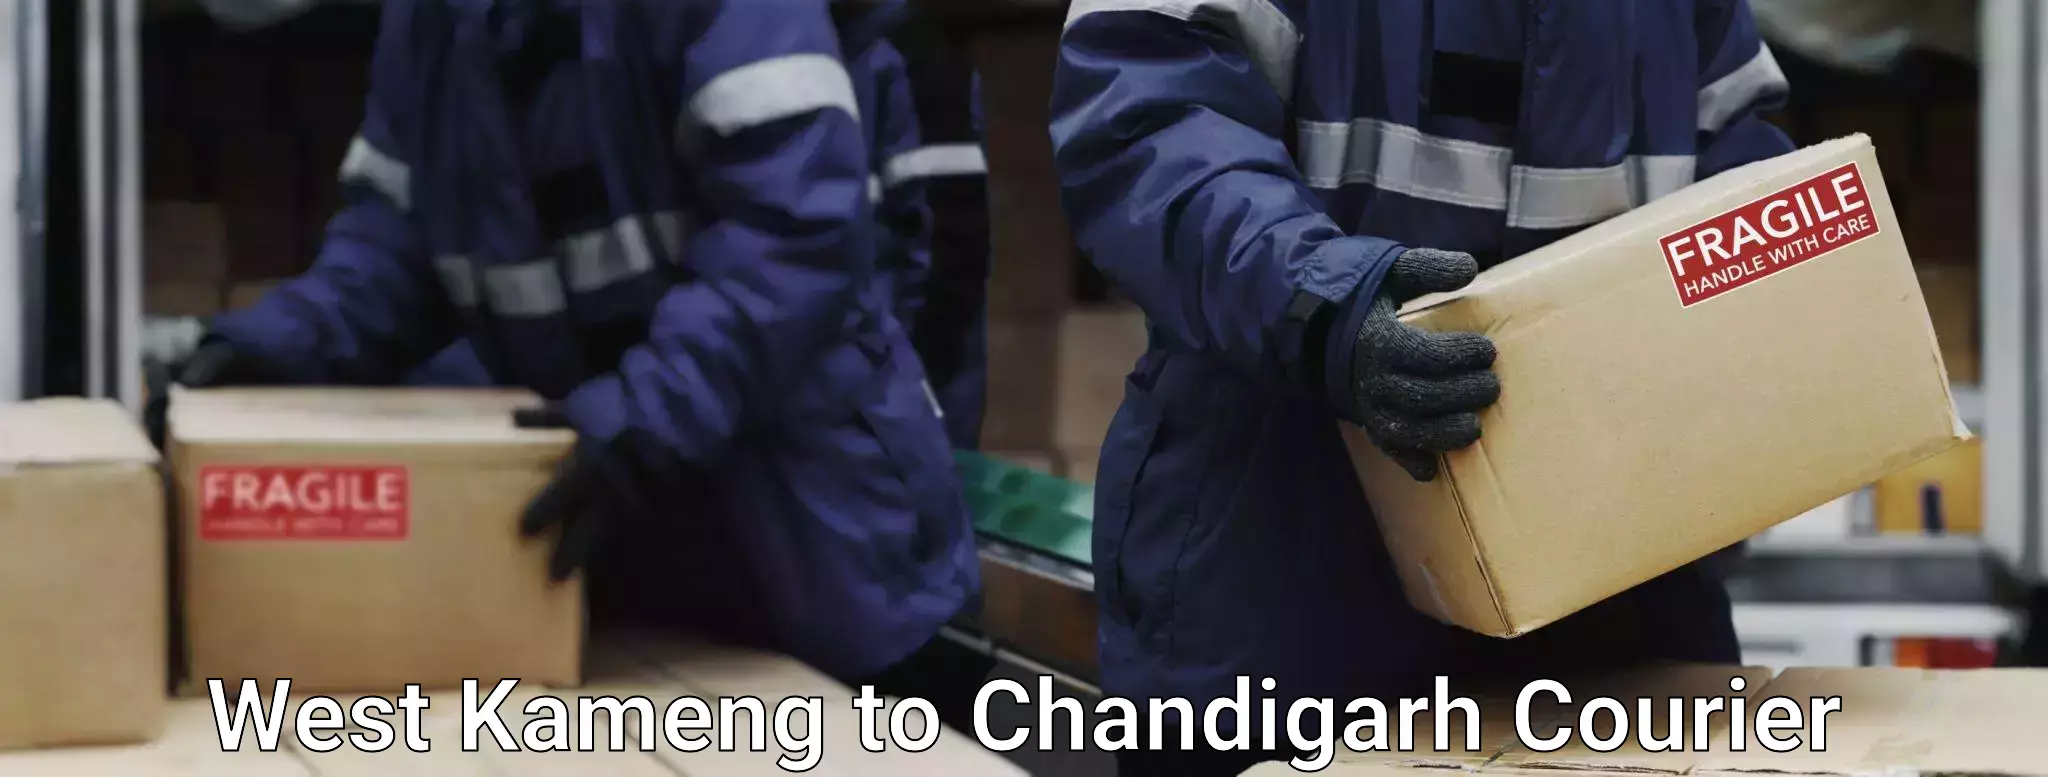 Luggage shipment strategy in West Kameng to Chandigarh